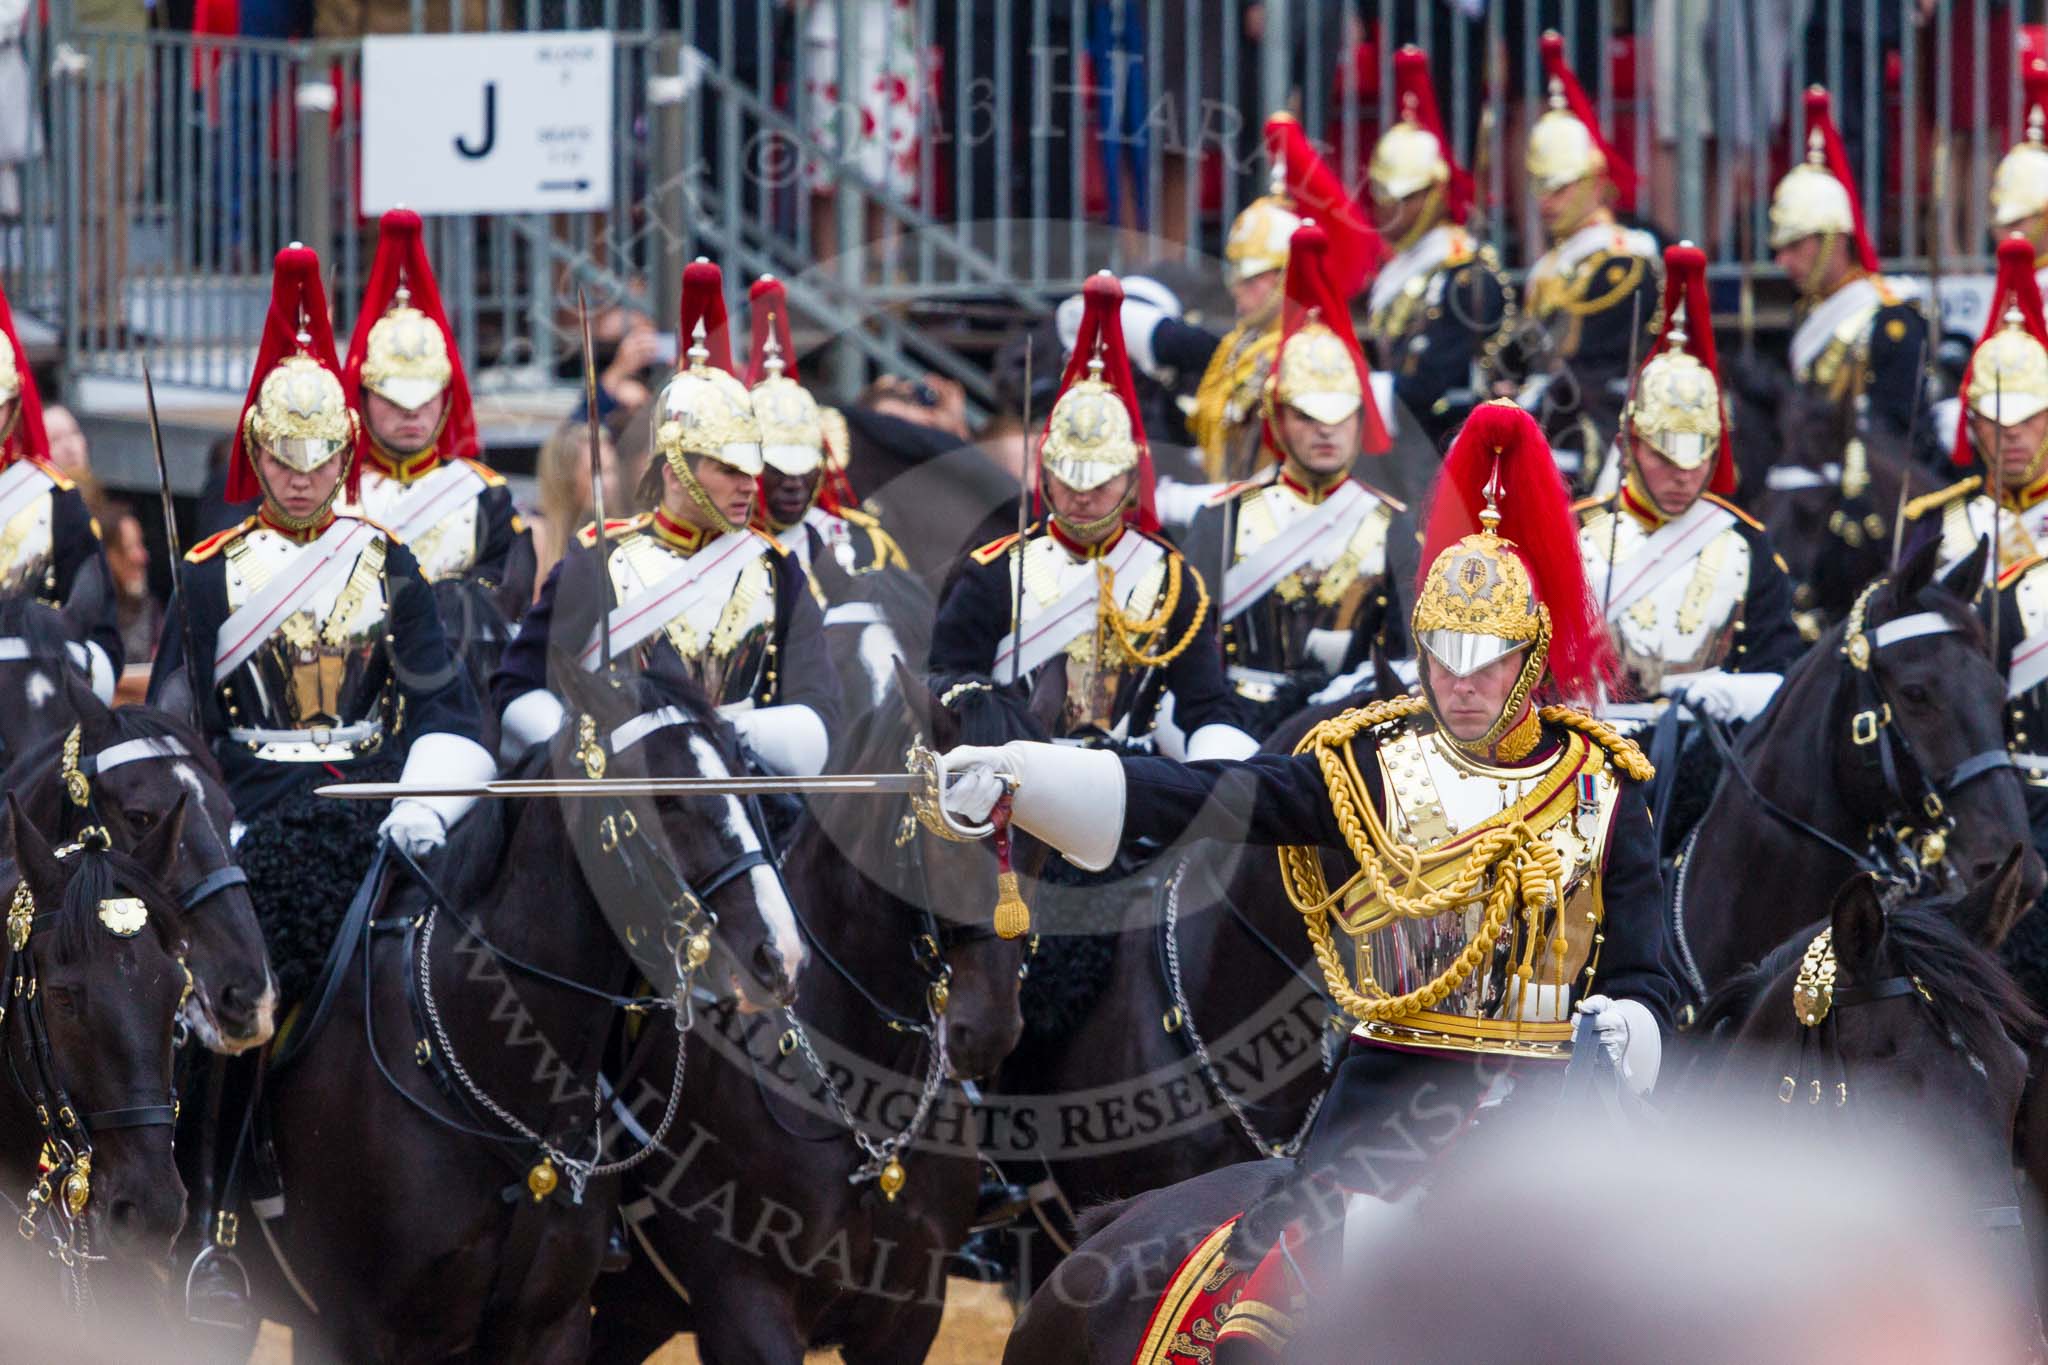 Trooping the Colour 2015. Image #560, 13 June 2015 11:54 Horse Guards Parade, London, UK